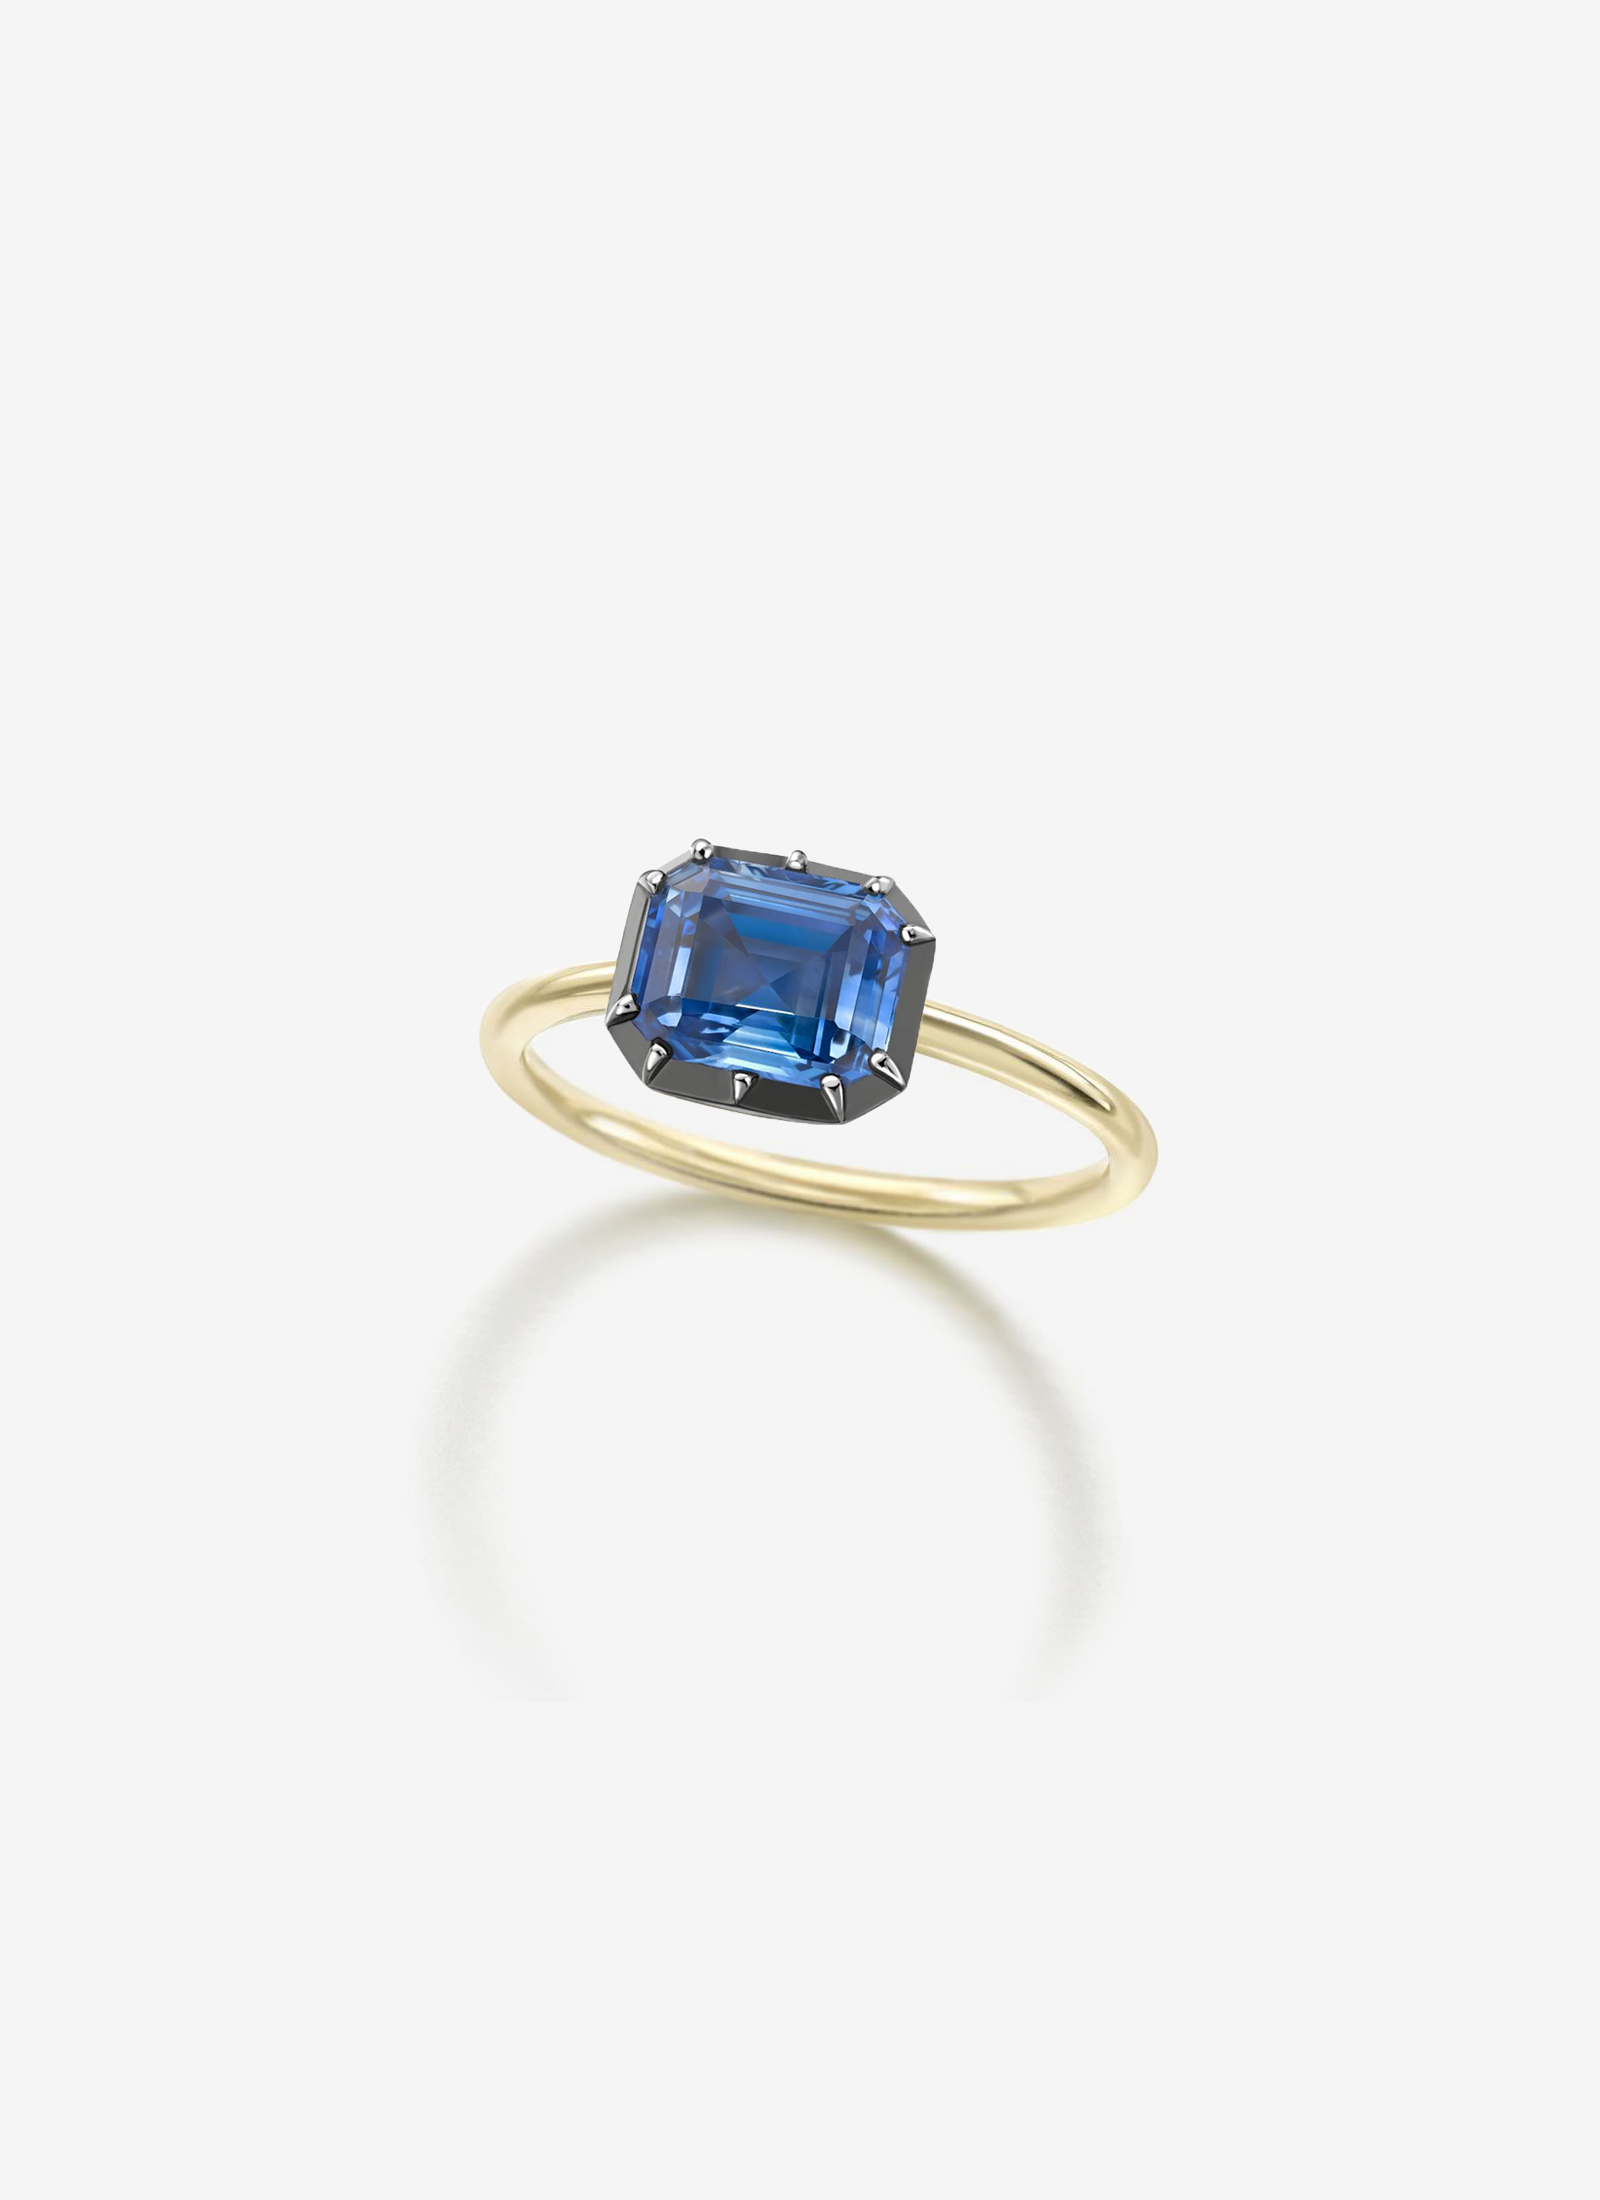 Signature Sapphire Ring - Emerald Cut 2.02ct Sapphire East-West Button Back Ring